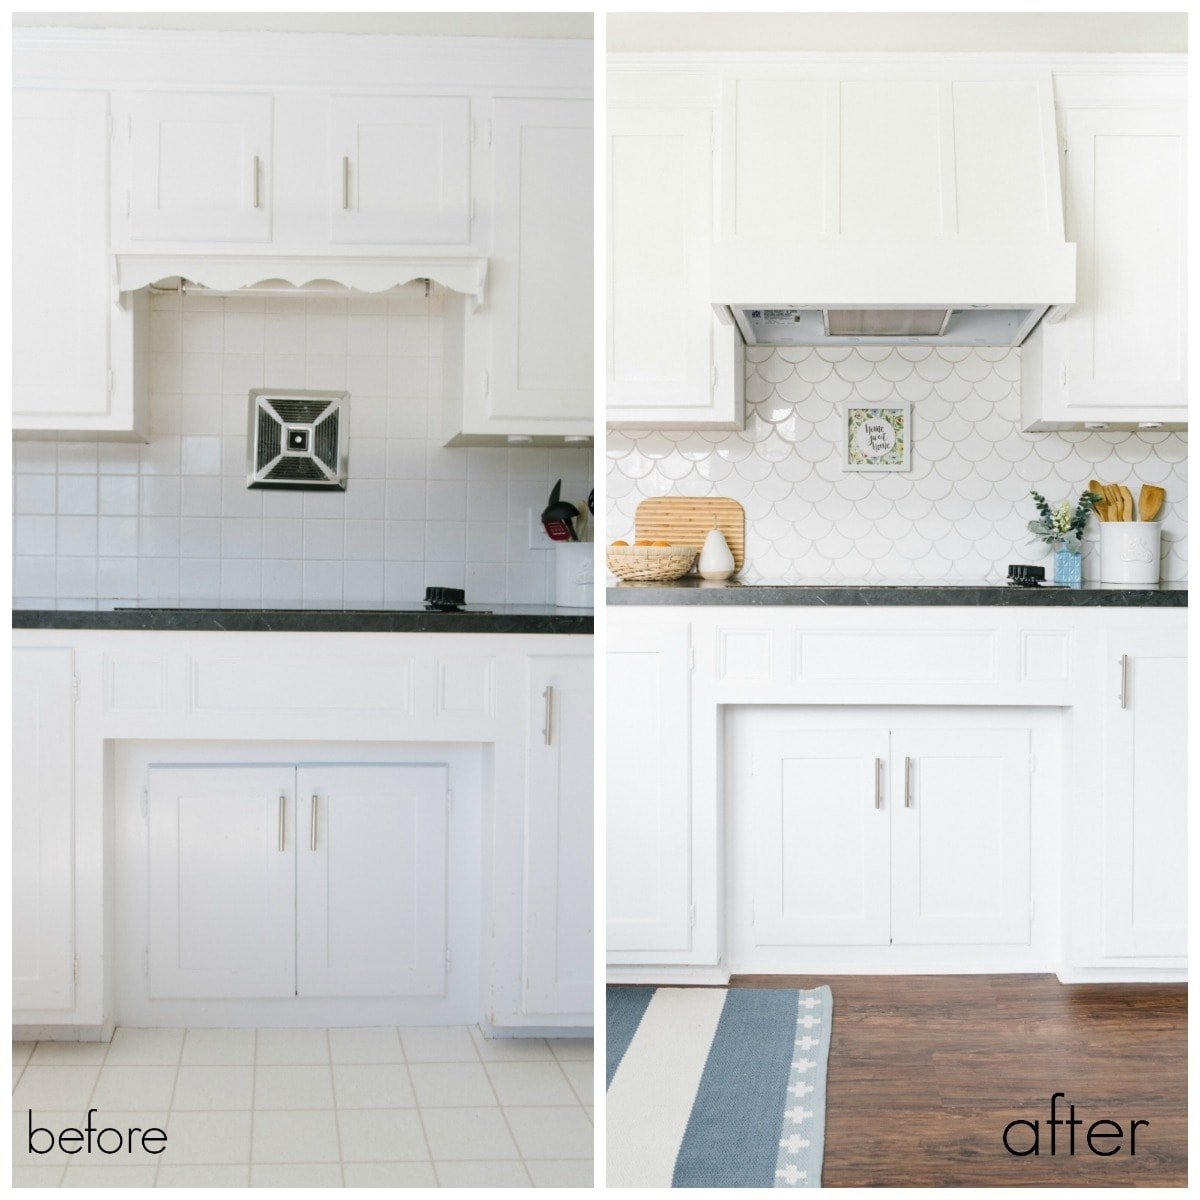 range hood side by side before and after